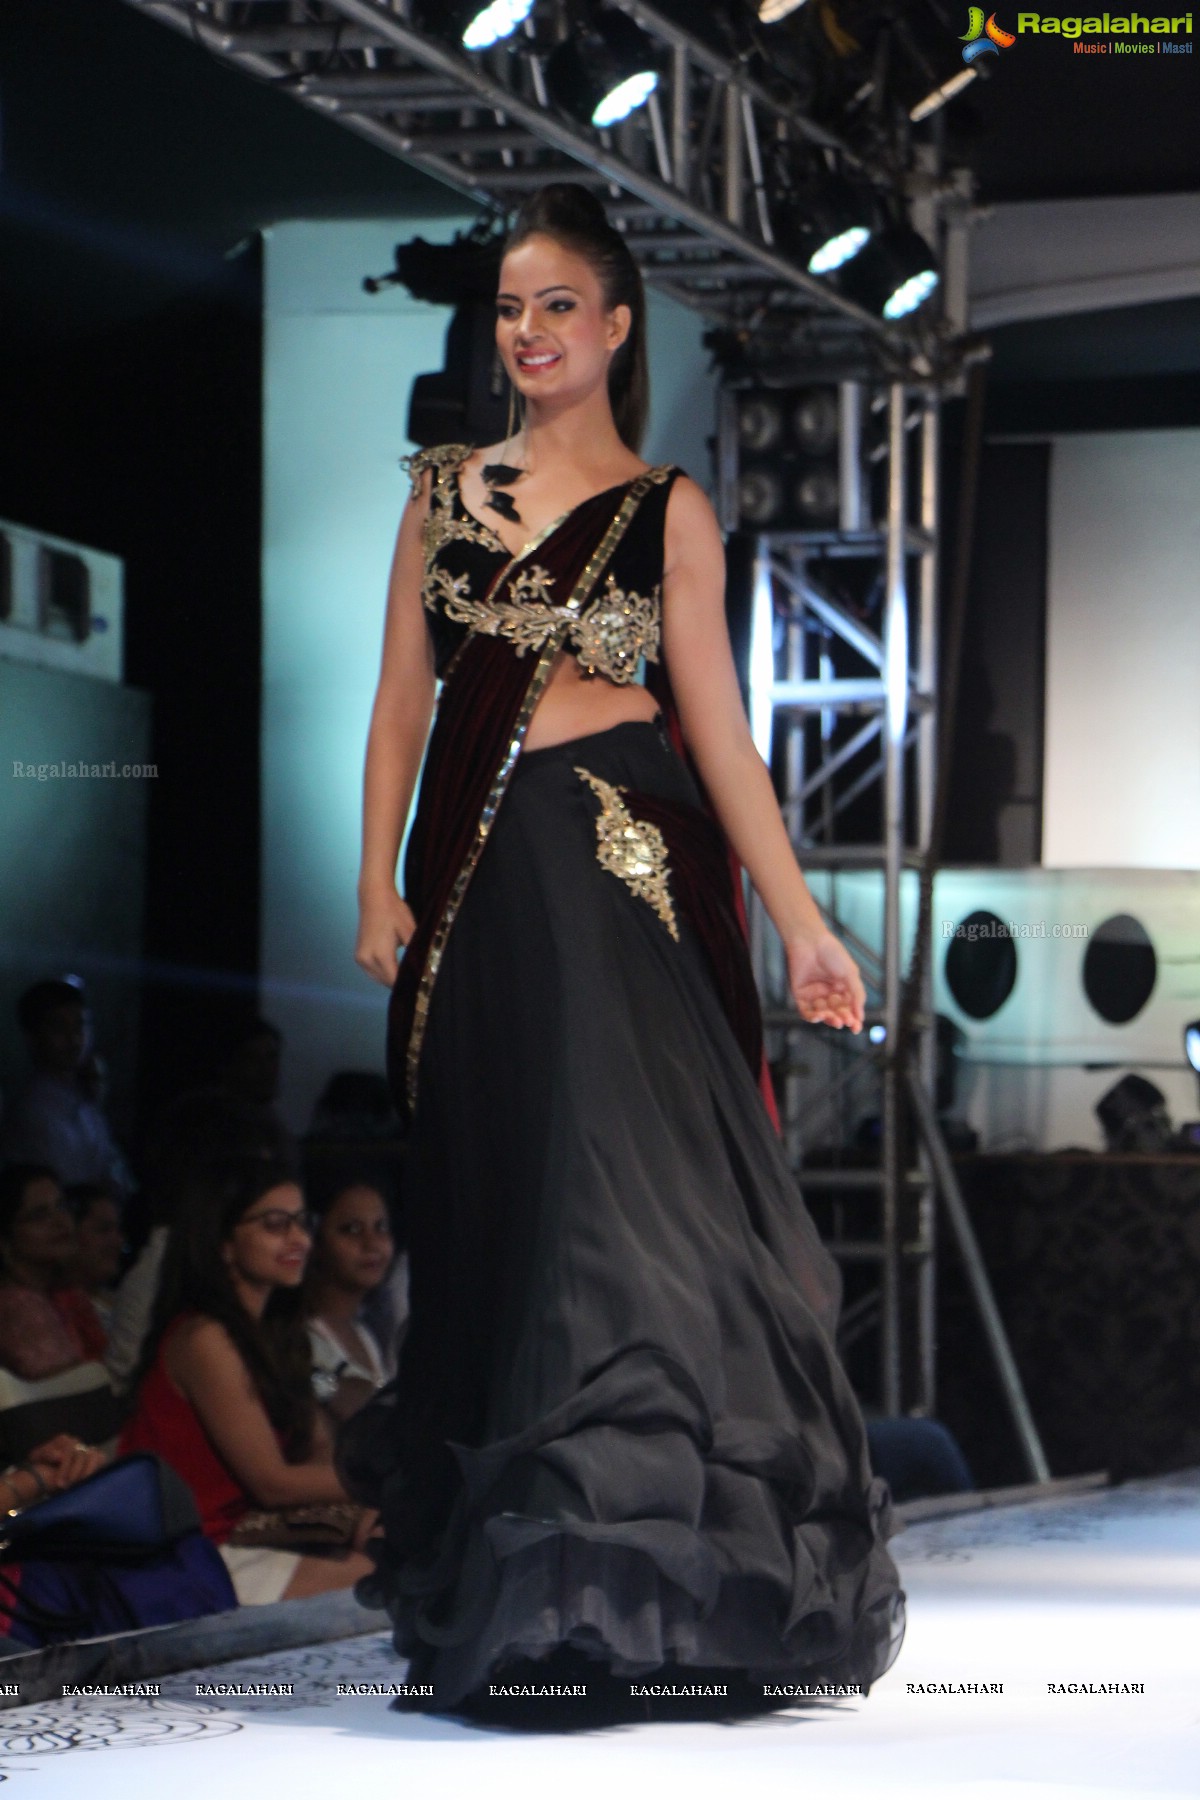 An Exclusive Fashion Show at The Wedding Vows Show, The Westin - Hyderabad Mindspace